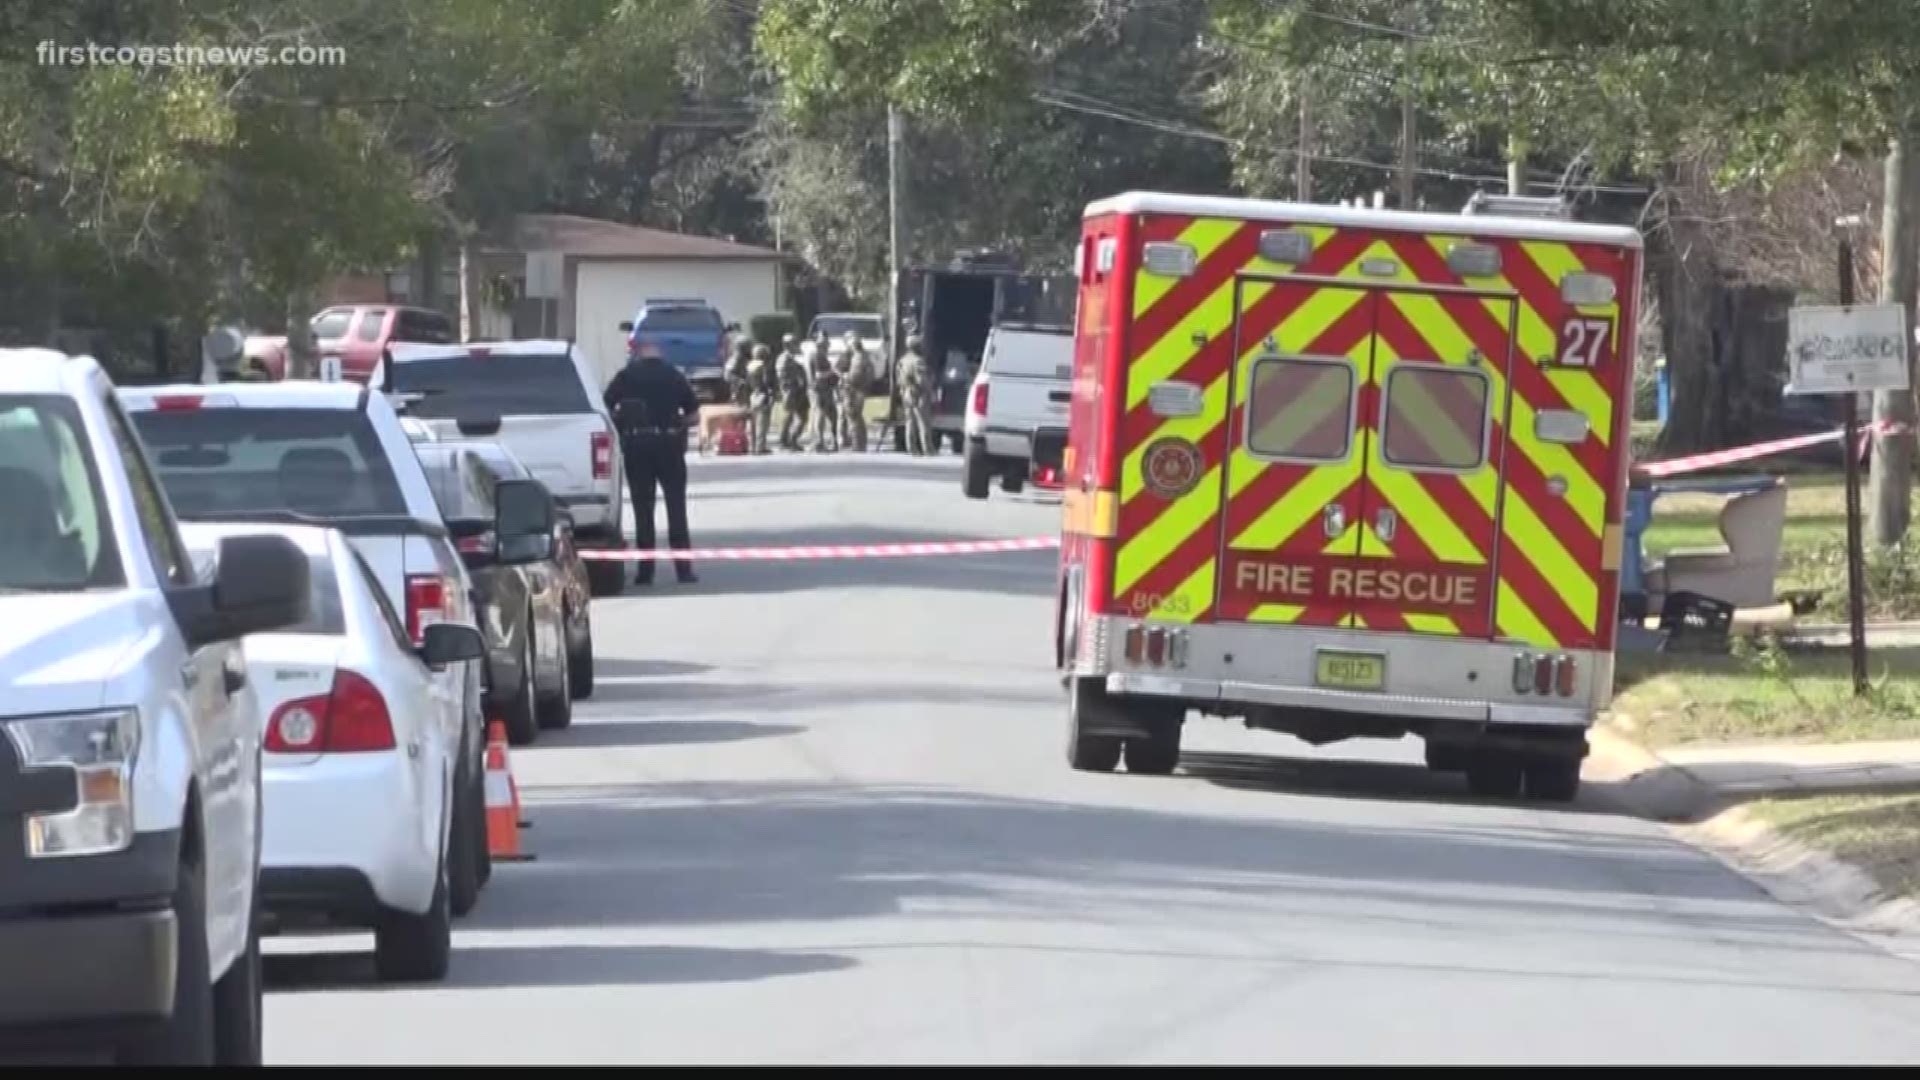 At around 11 a.m., Police and SWAT surrounded a home along Shady Oaks Drive in Arlington Manor in search for a man with an active warrant.